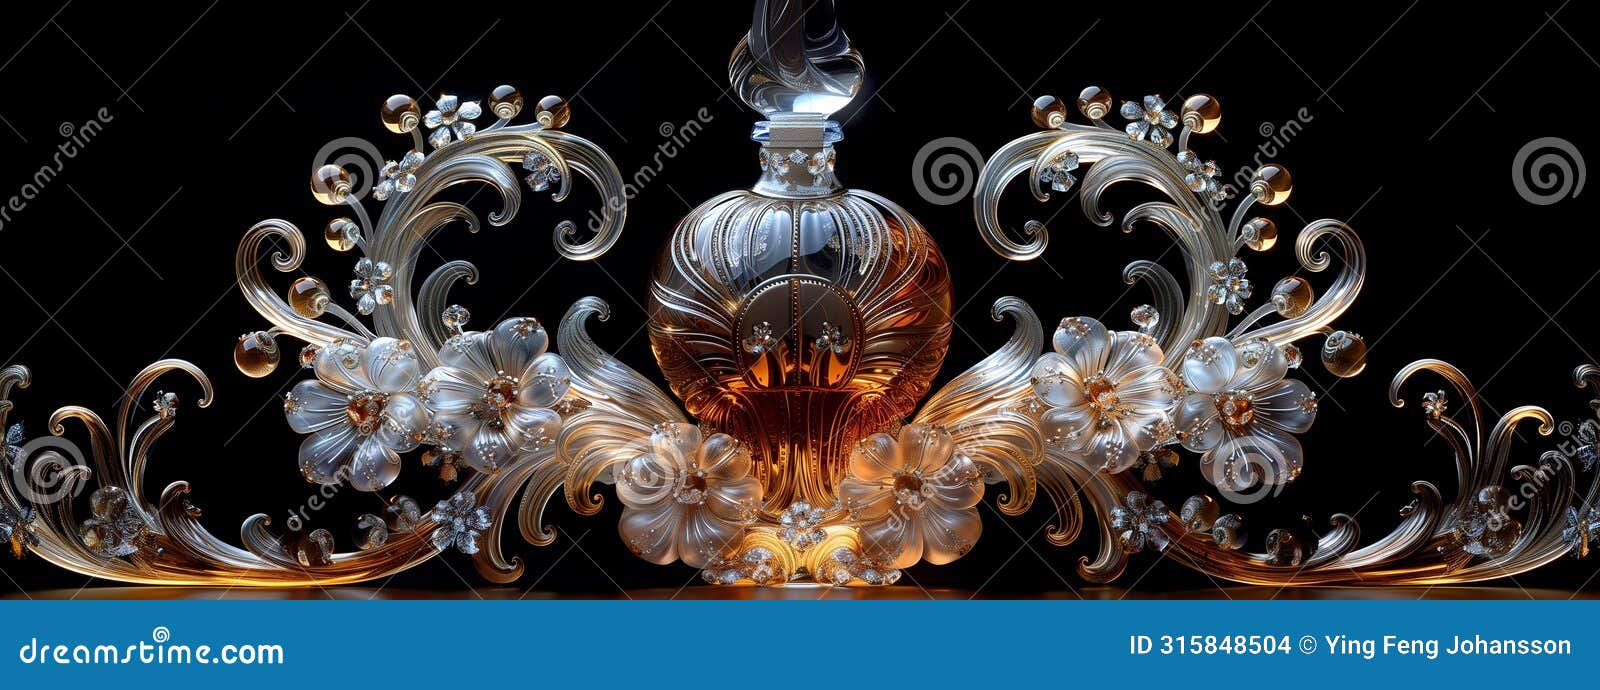 witness the convergence of art and impossibility: a crystal carafe showcase an intricate fractal  that defies the boundaries